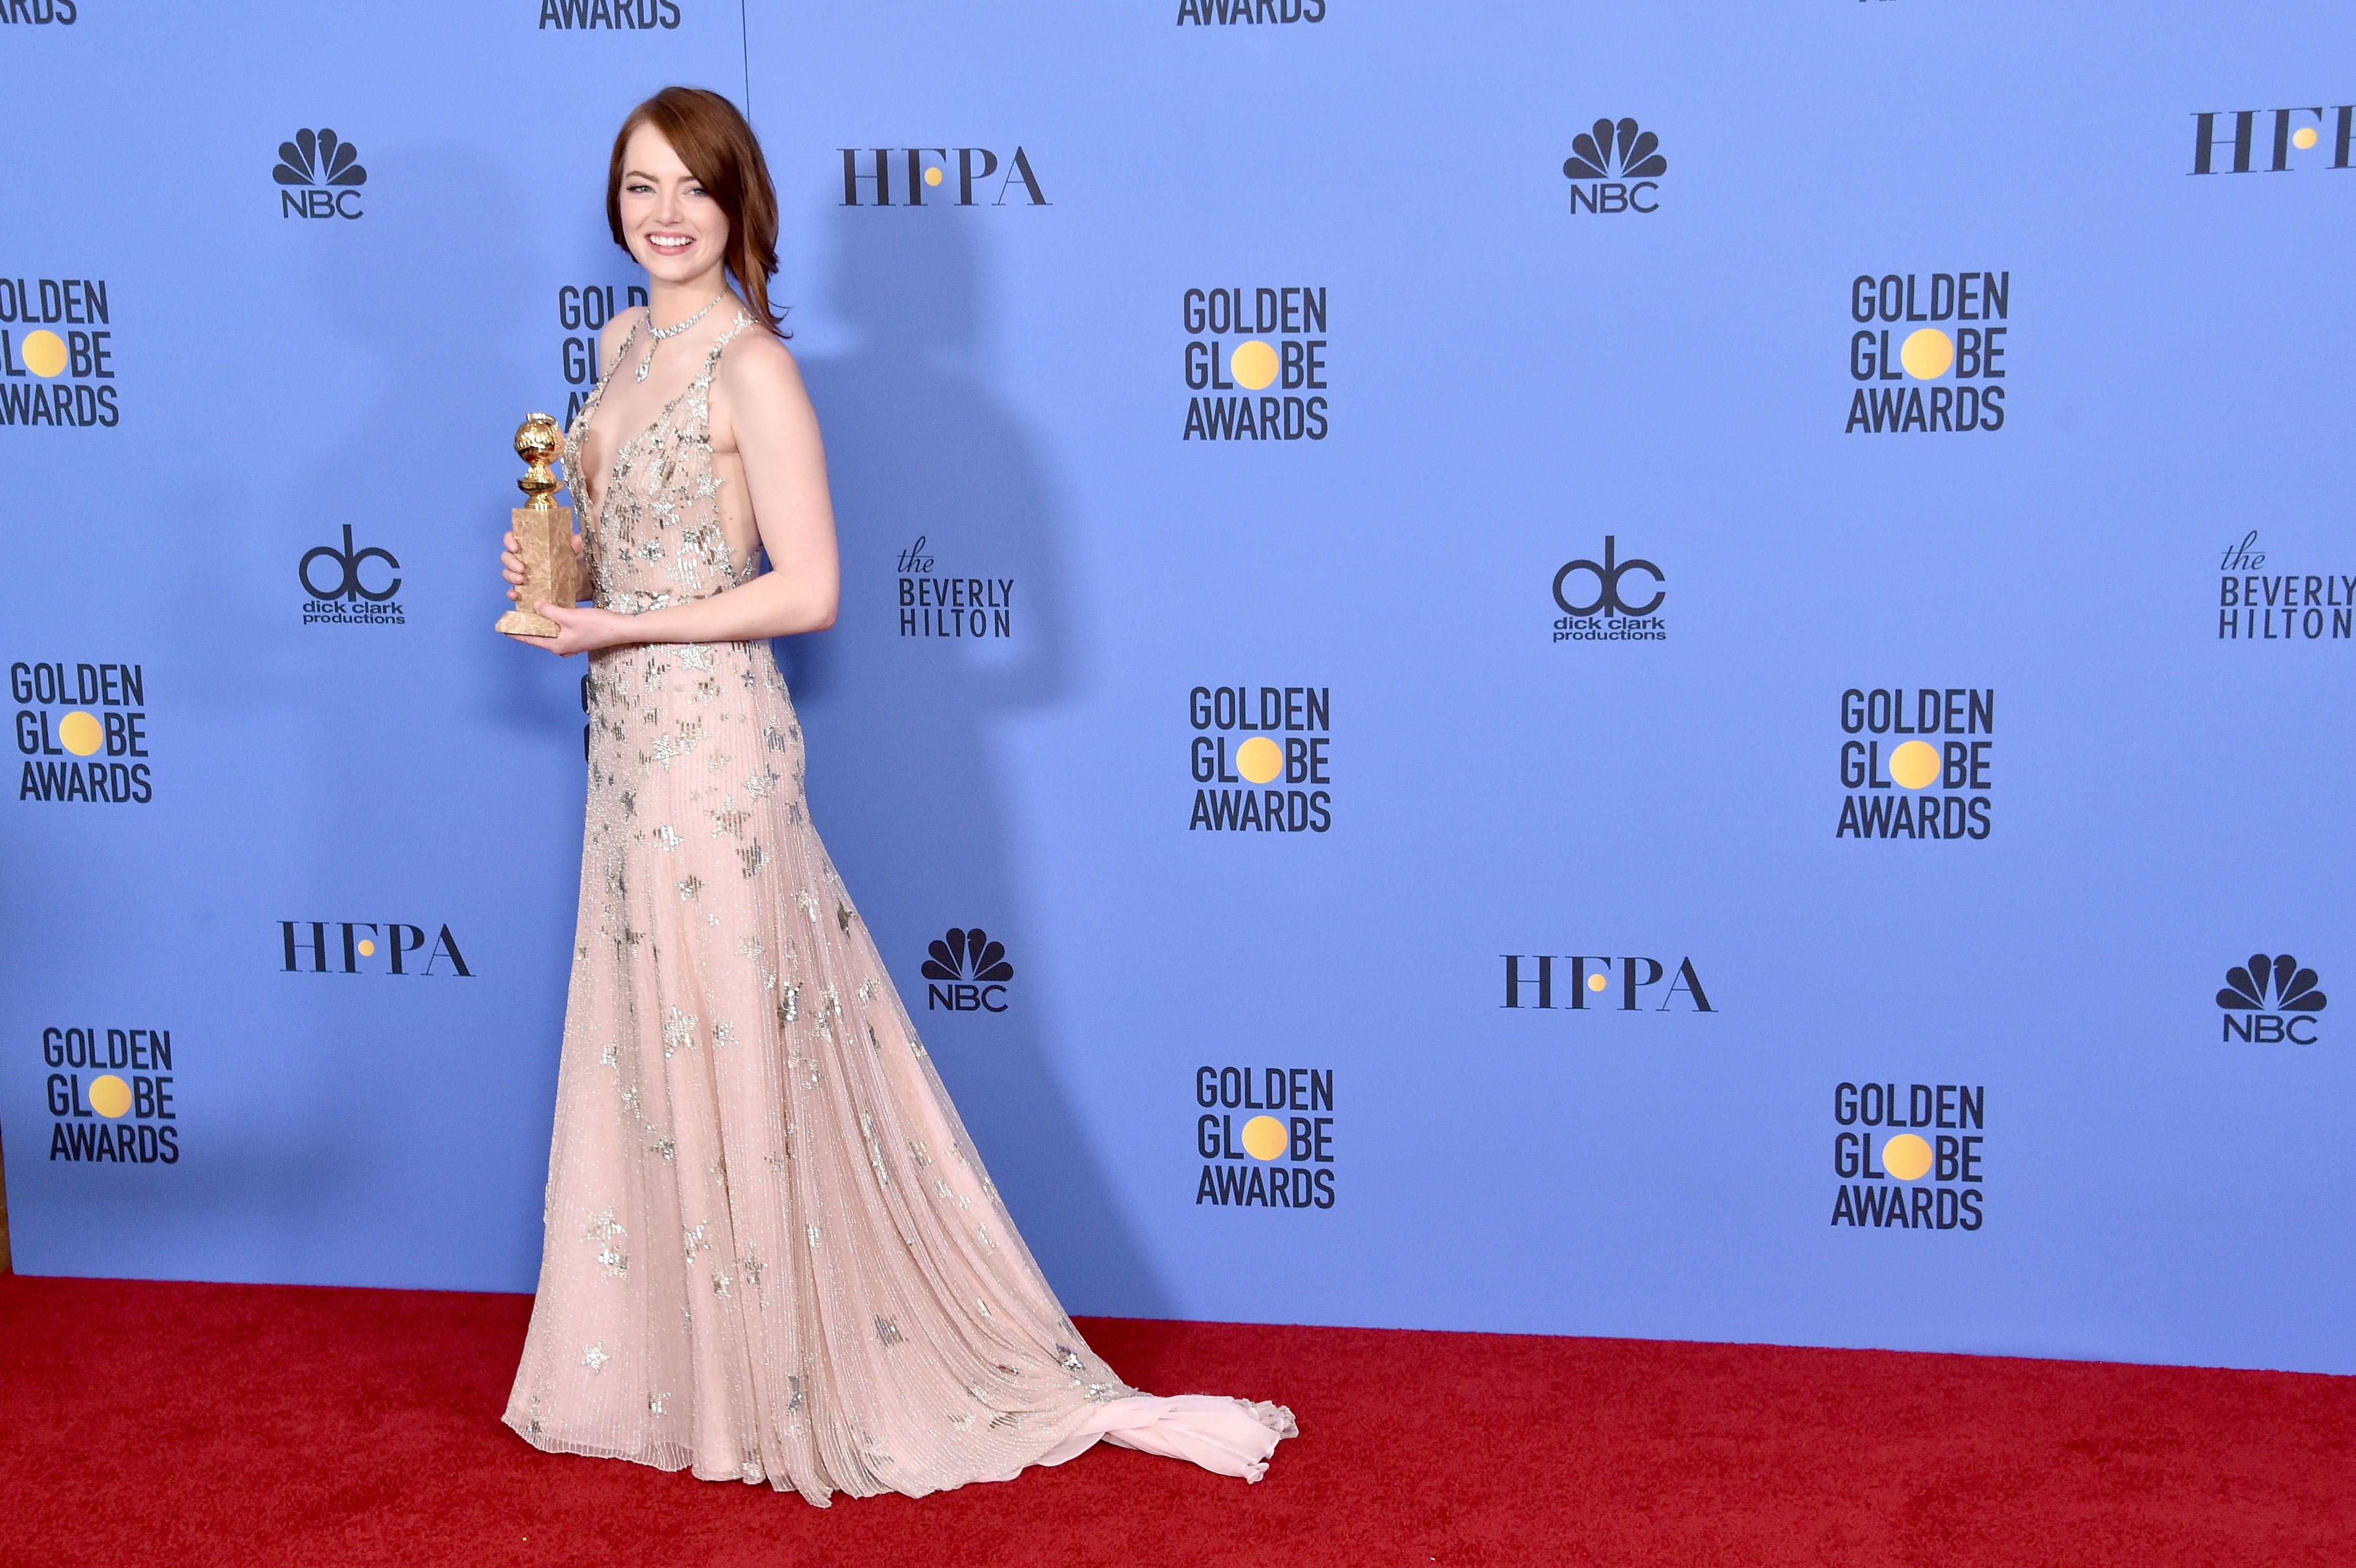 BEVERLY HILLS, CA - JANUARY 08: Actress Emma Stone poses in the press room during the 74th Annual Golden Globe Awards at The Beverly Hilton Hotel on January 8, 2017 in Beverly Hills, California. (Photo by Alberto E. Rodriguez/Getty Images)